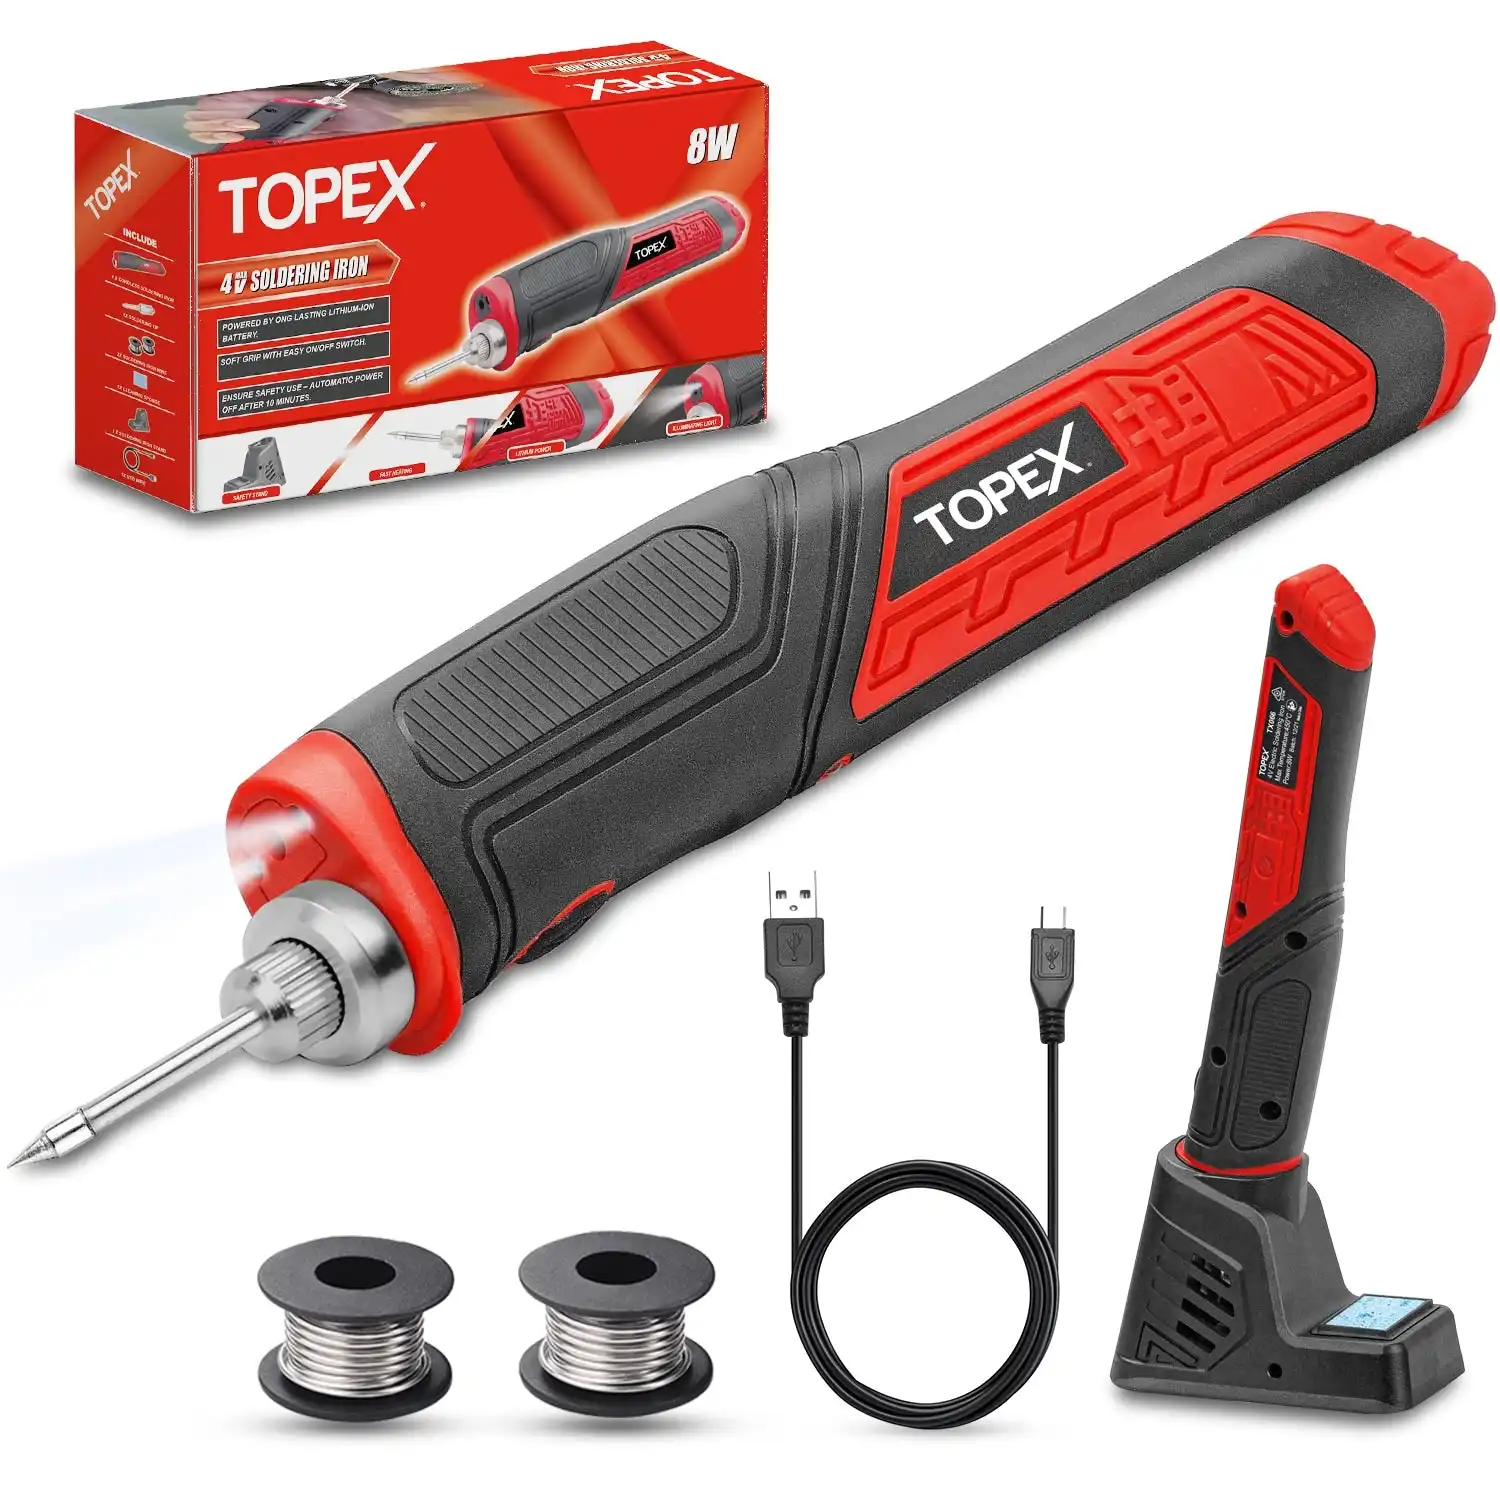 Topex 4V Max Cordless Soldering Iron with Rechargeable Lithium-Ion Battery